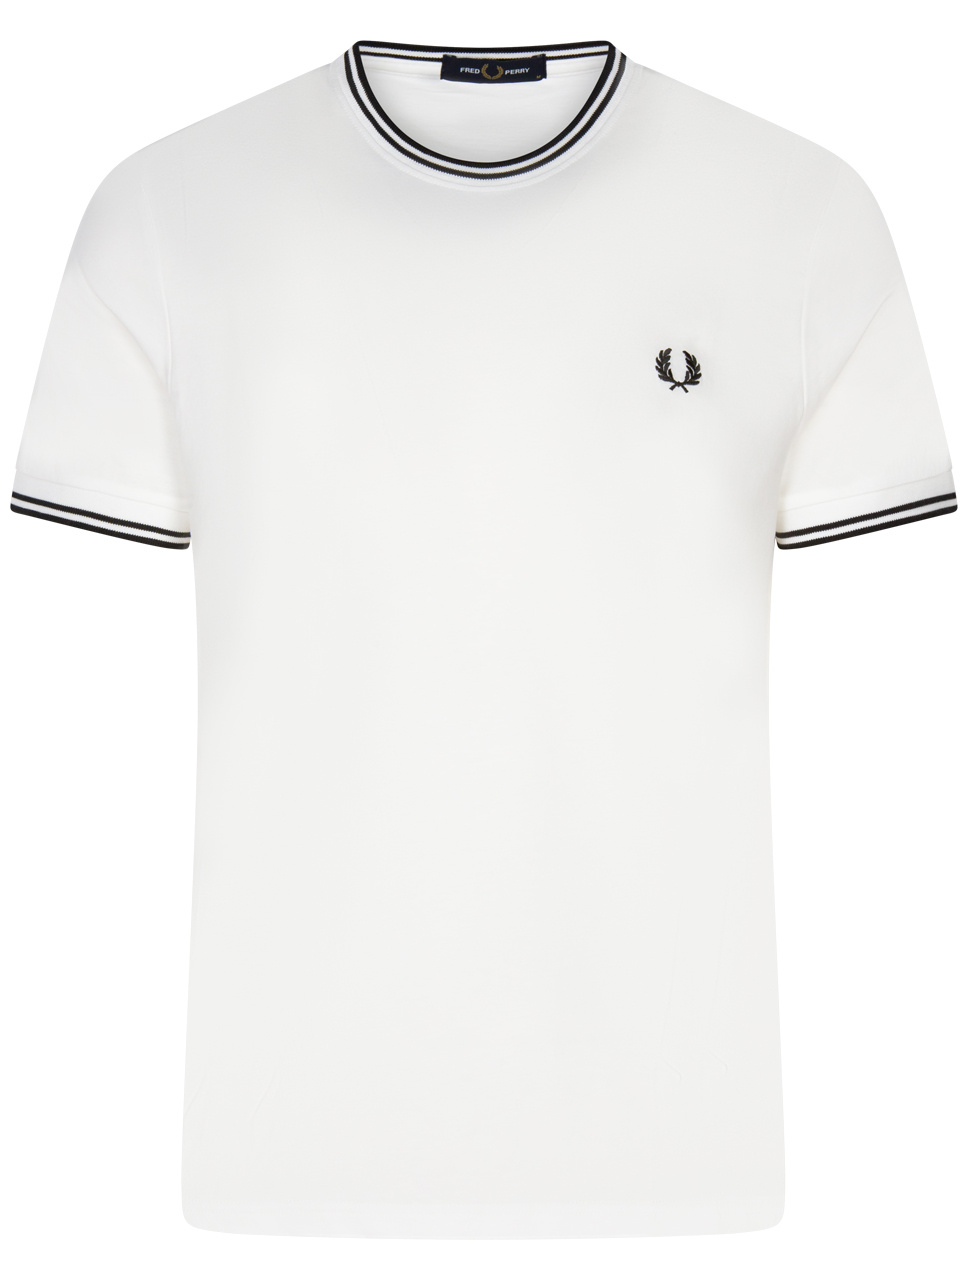 Tee-shirt col rond Fred Perry en coton blanc brodé